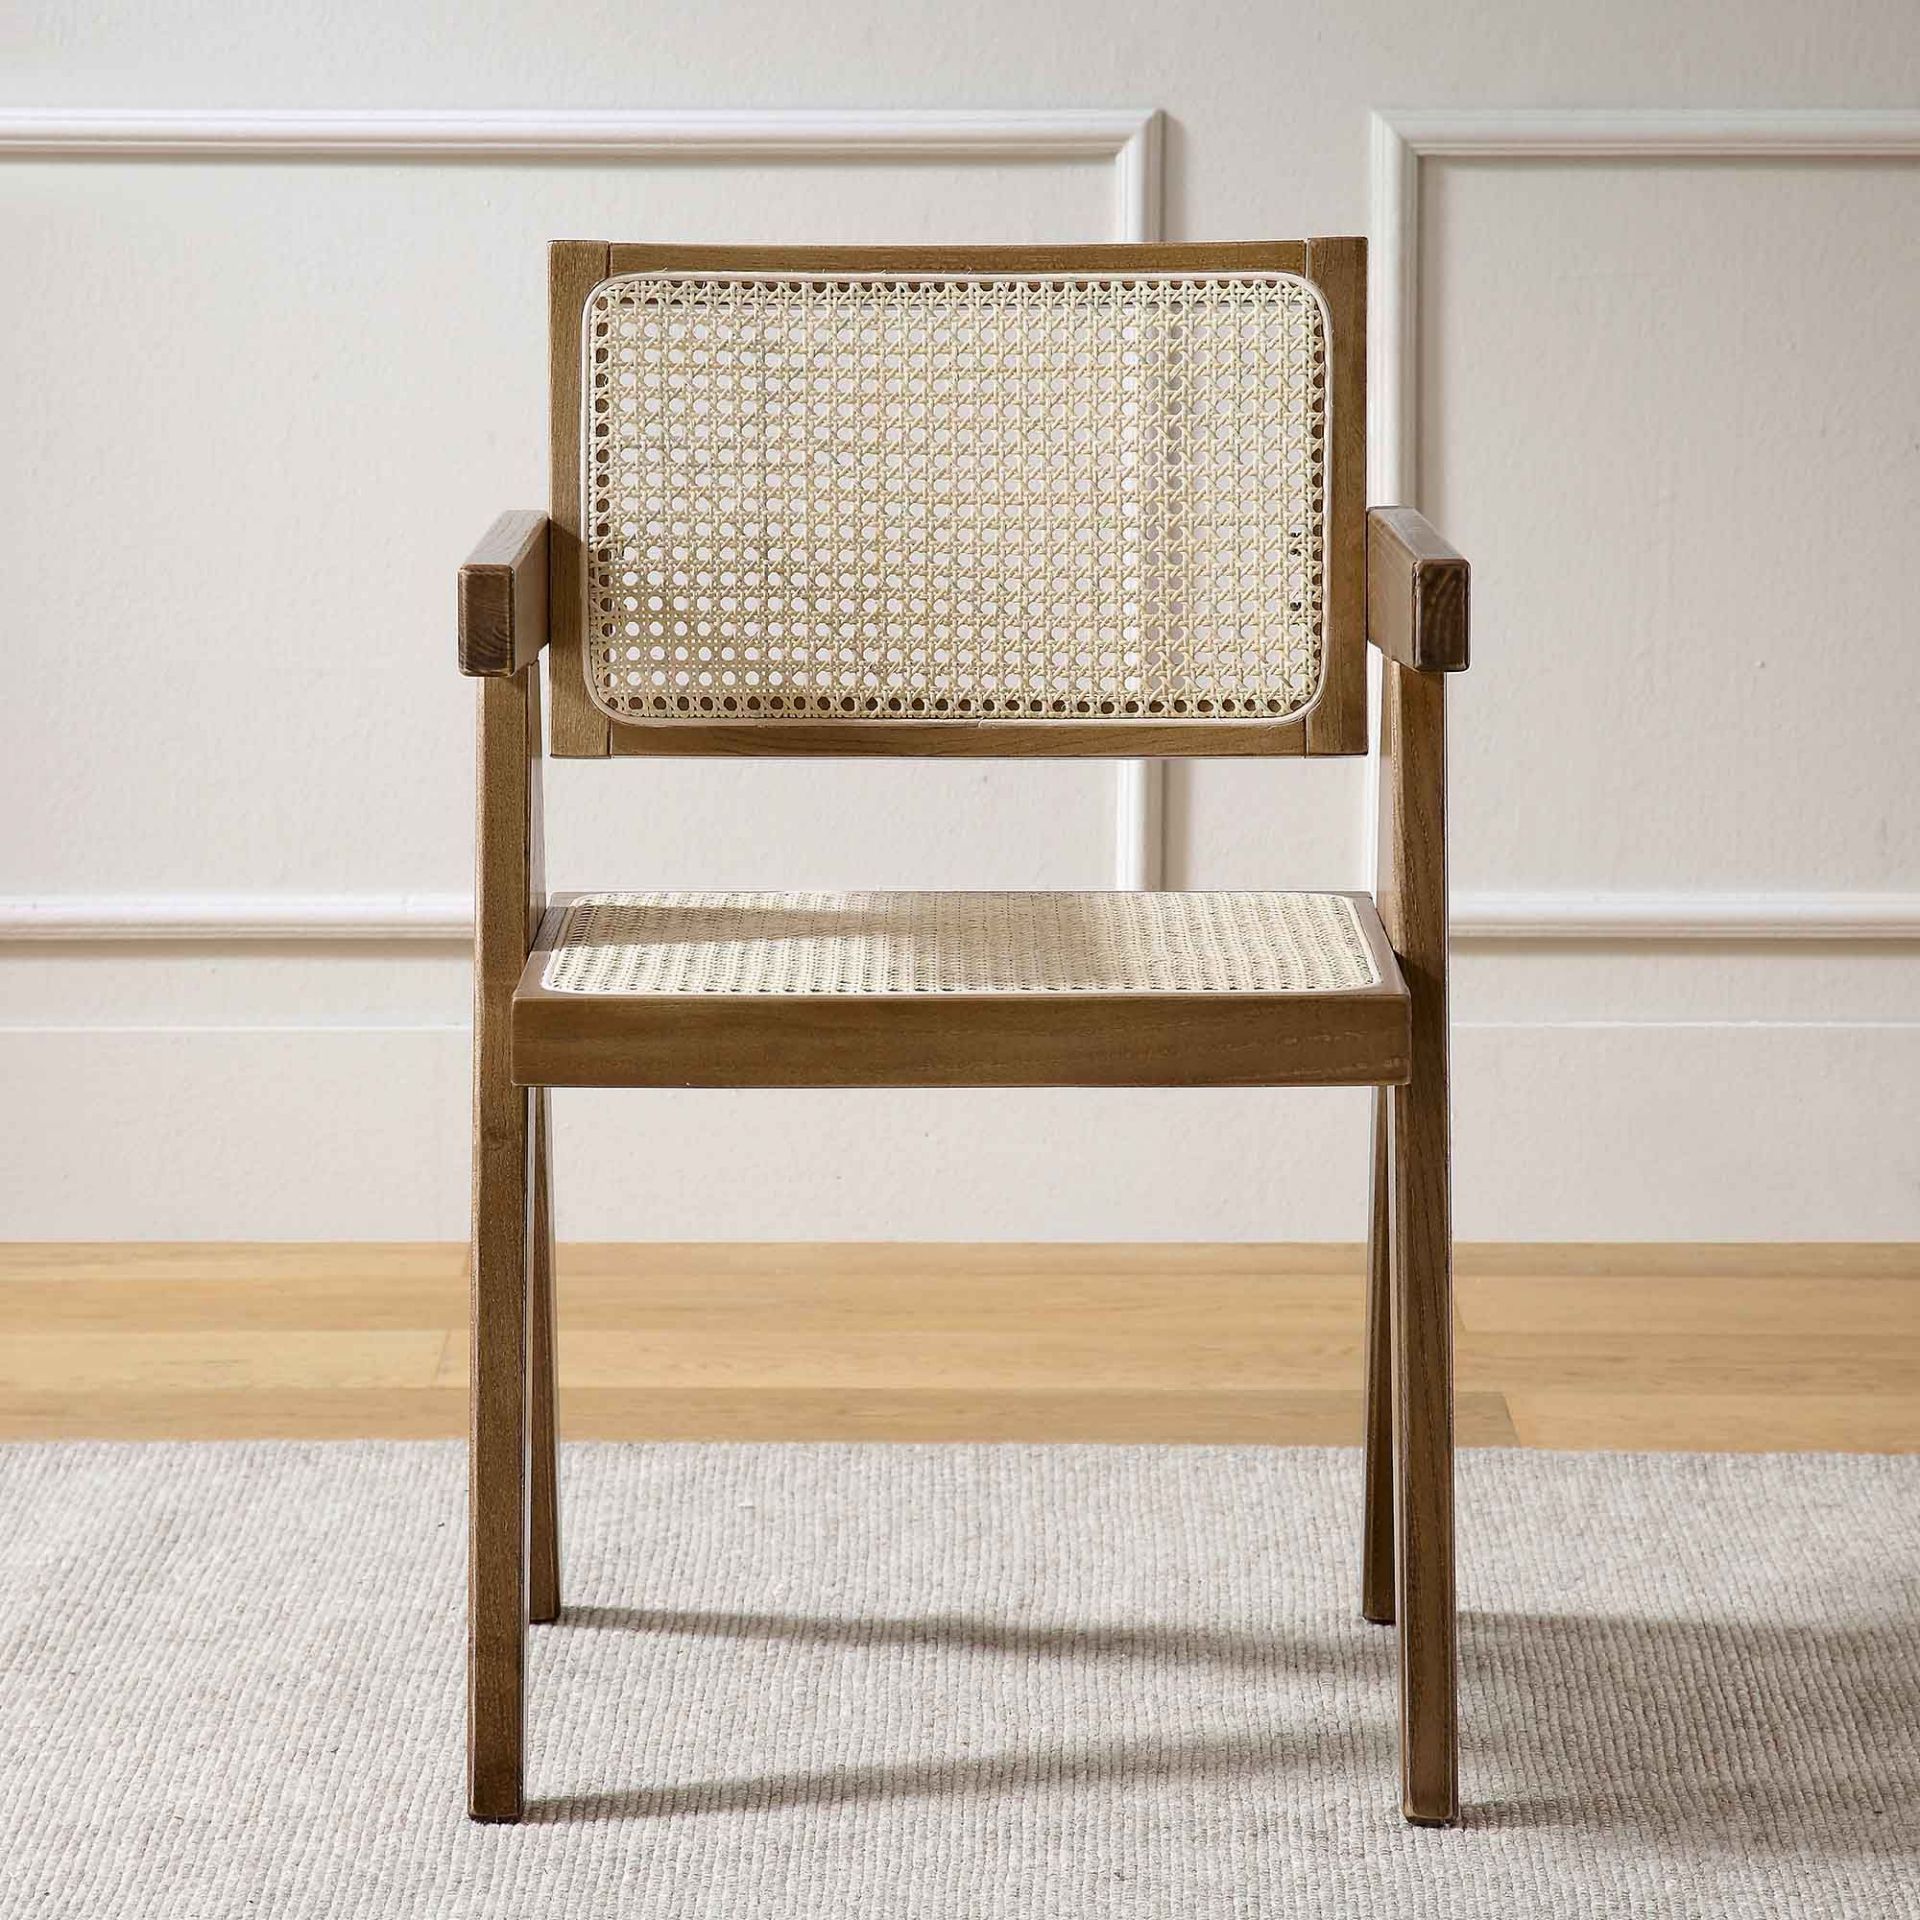 Jeanne Light Walnut Cane Rattan Solid Beech Wood Dining Chair. - R13.7. The cane rattan in the chair - Image 2 of 4